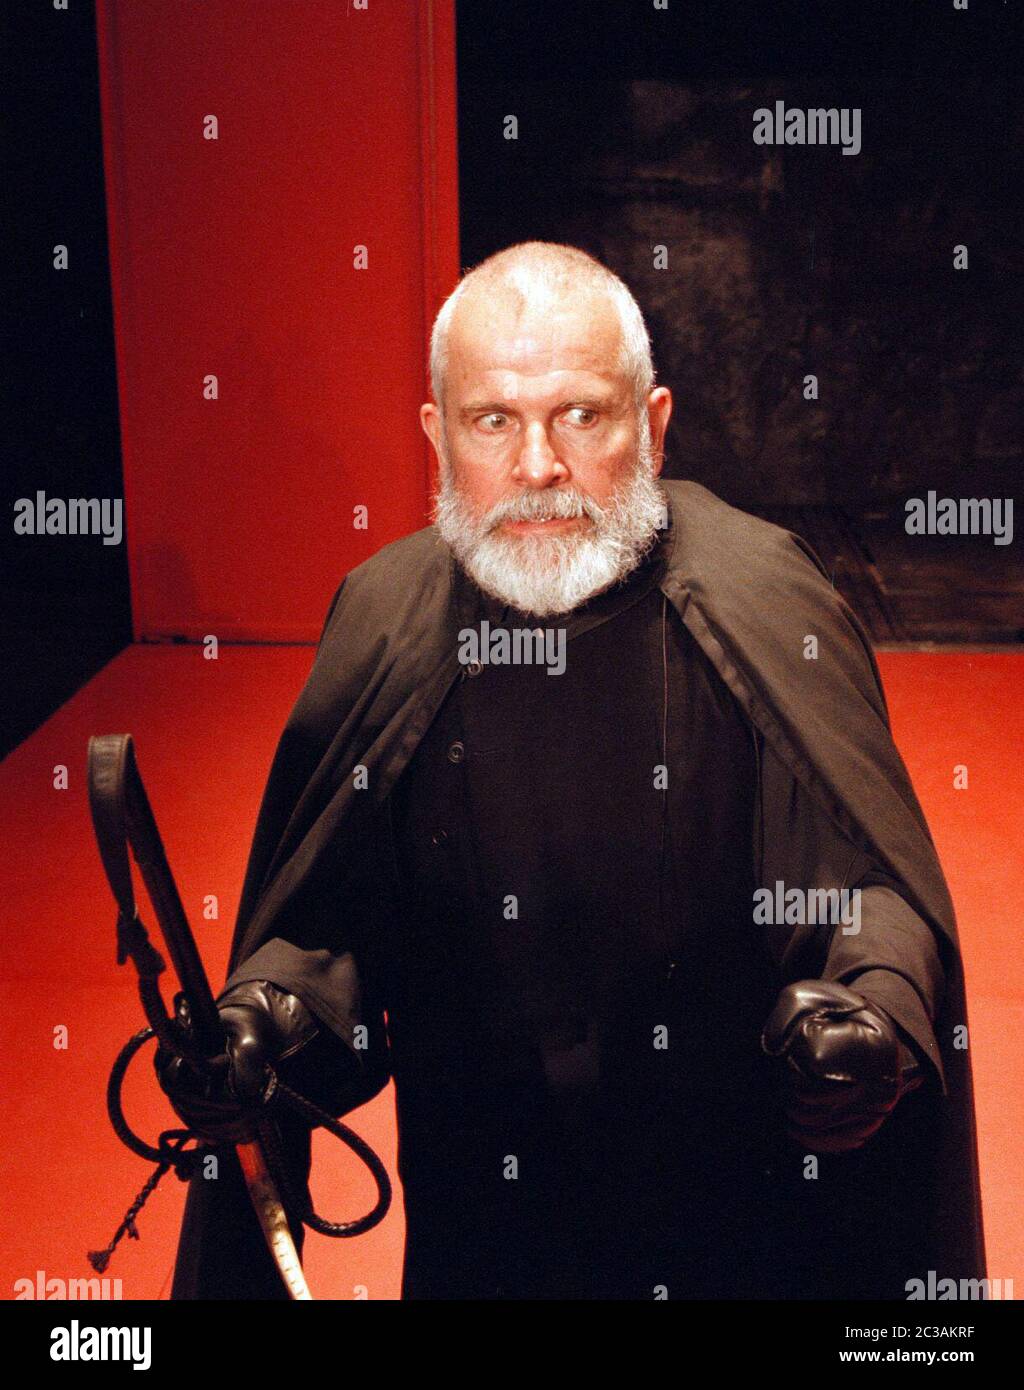 Ian Holm as Lear in KING LEAR by Shakespeare at the Cottesloe Theatre, National Theatre (NT), London SE1 27/03/1997   design: Bob Crowley  lighting: Jean Kalman  director: Richard Eyre Stock Photo